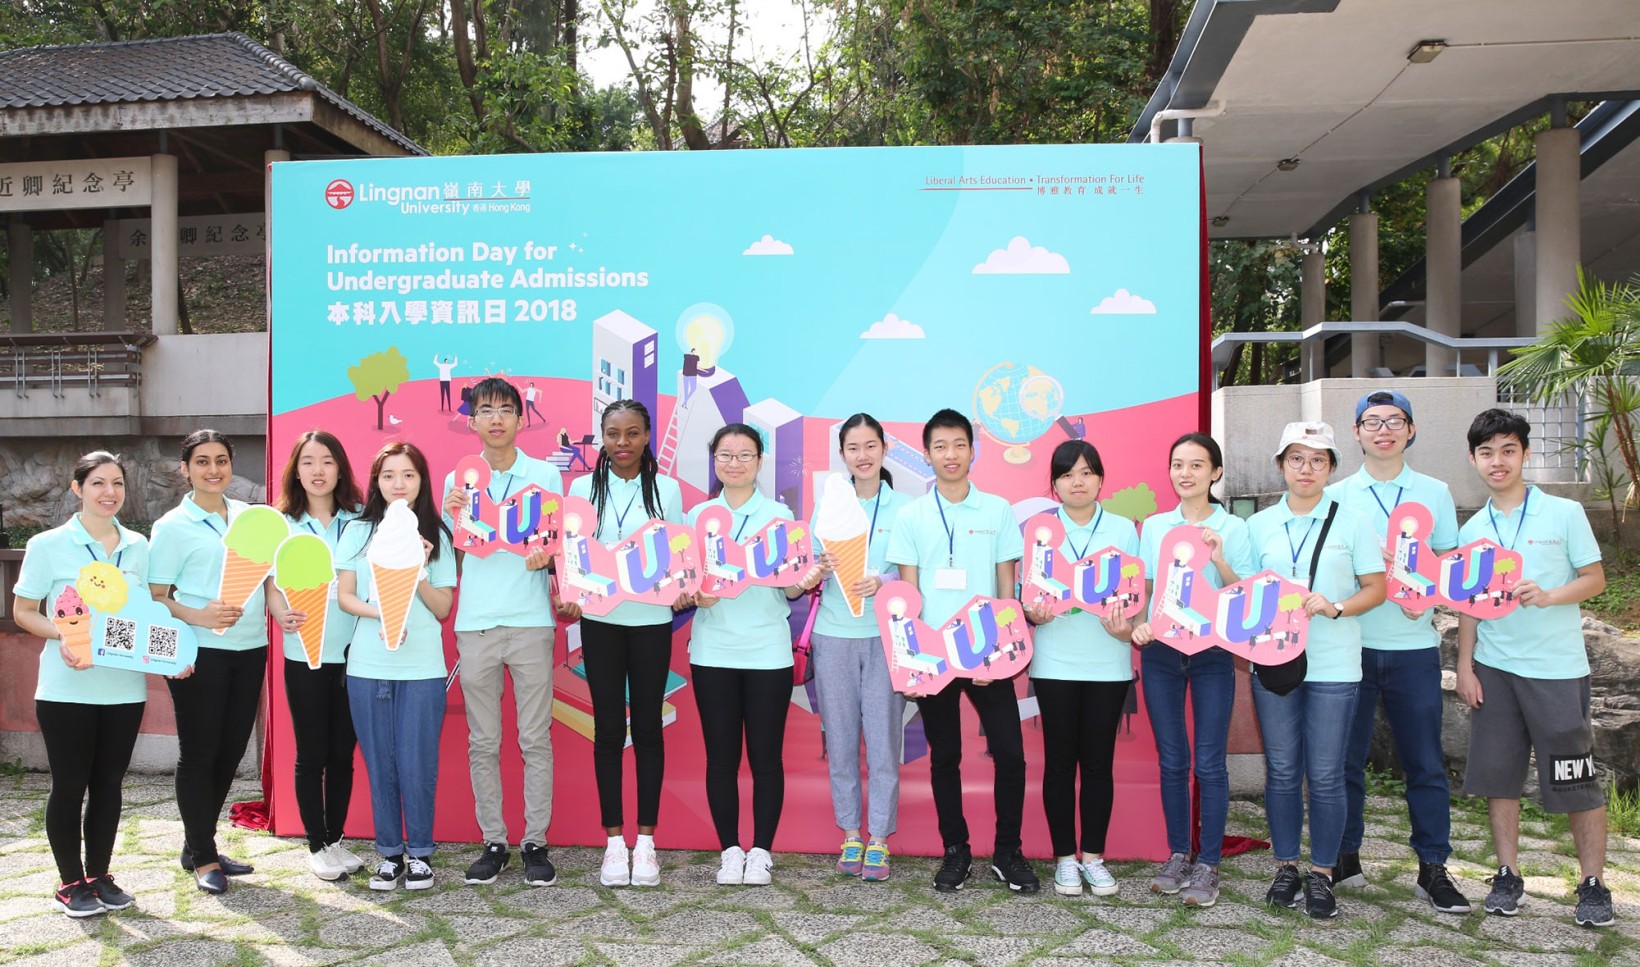 Lingnan organises Information Day to introduce campus life and programme information